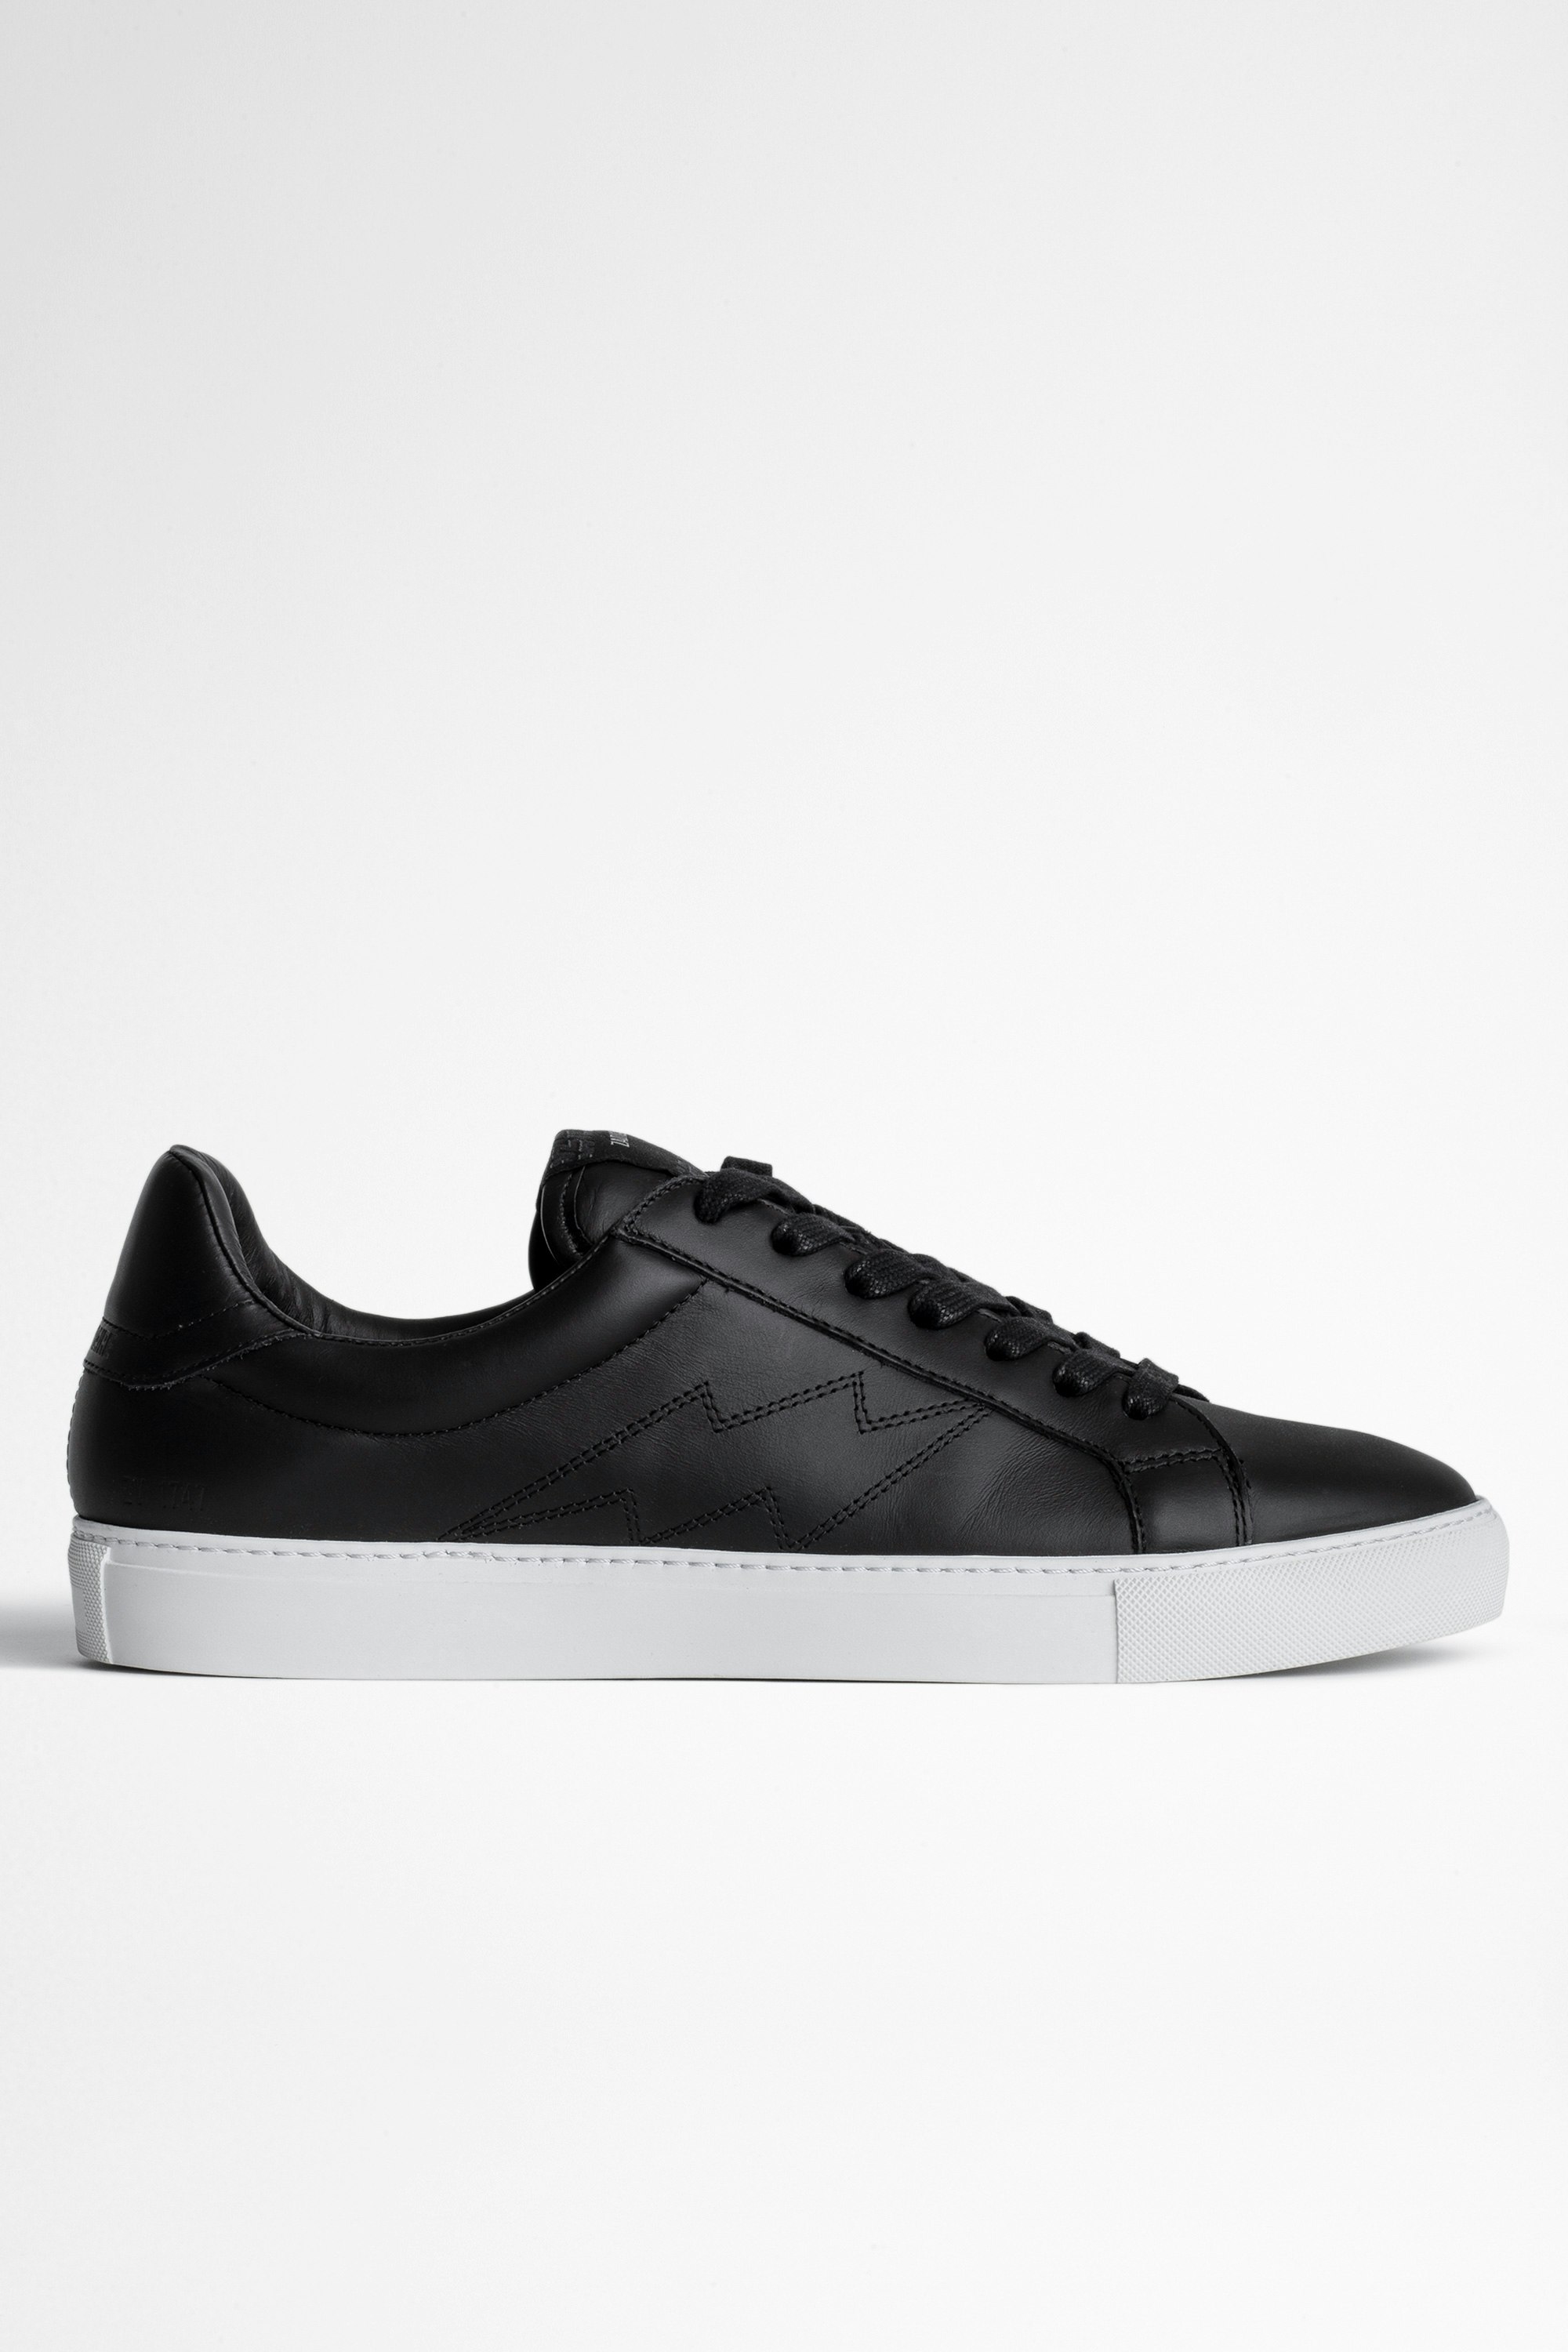 ZV1747 Flash Trainers - Men’s black leather sneakers with lightning bolt topstitching.